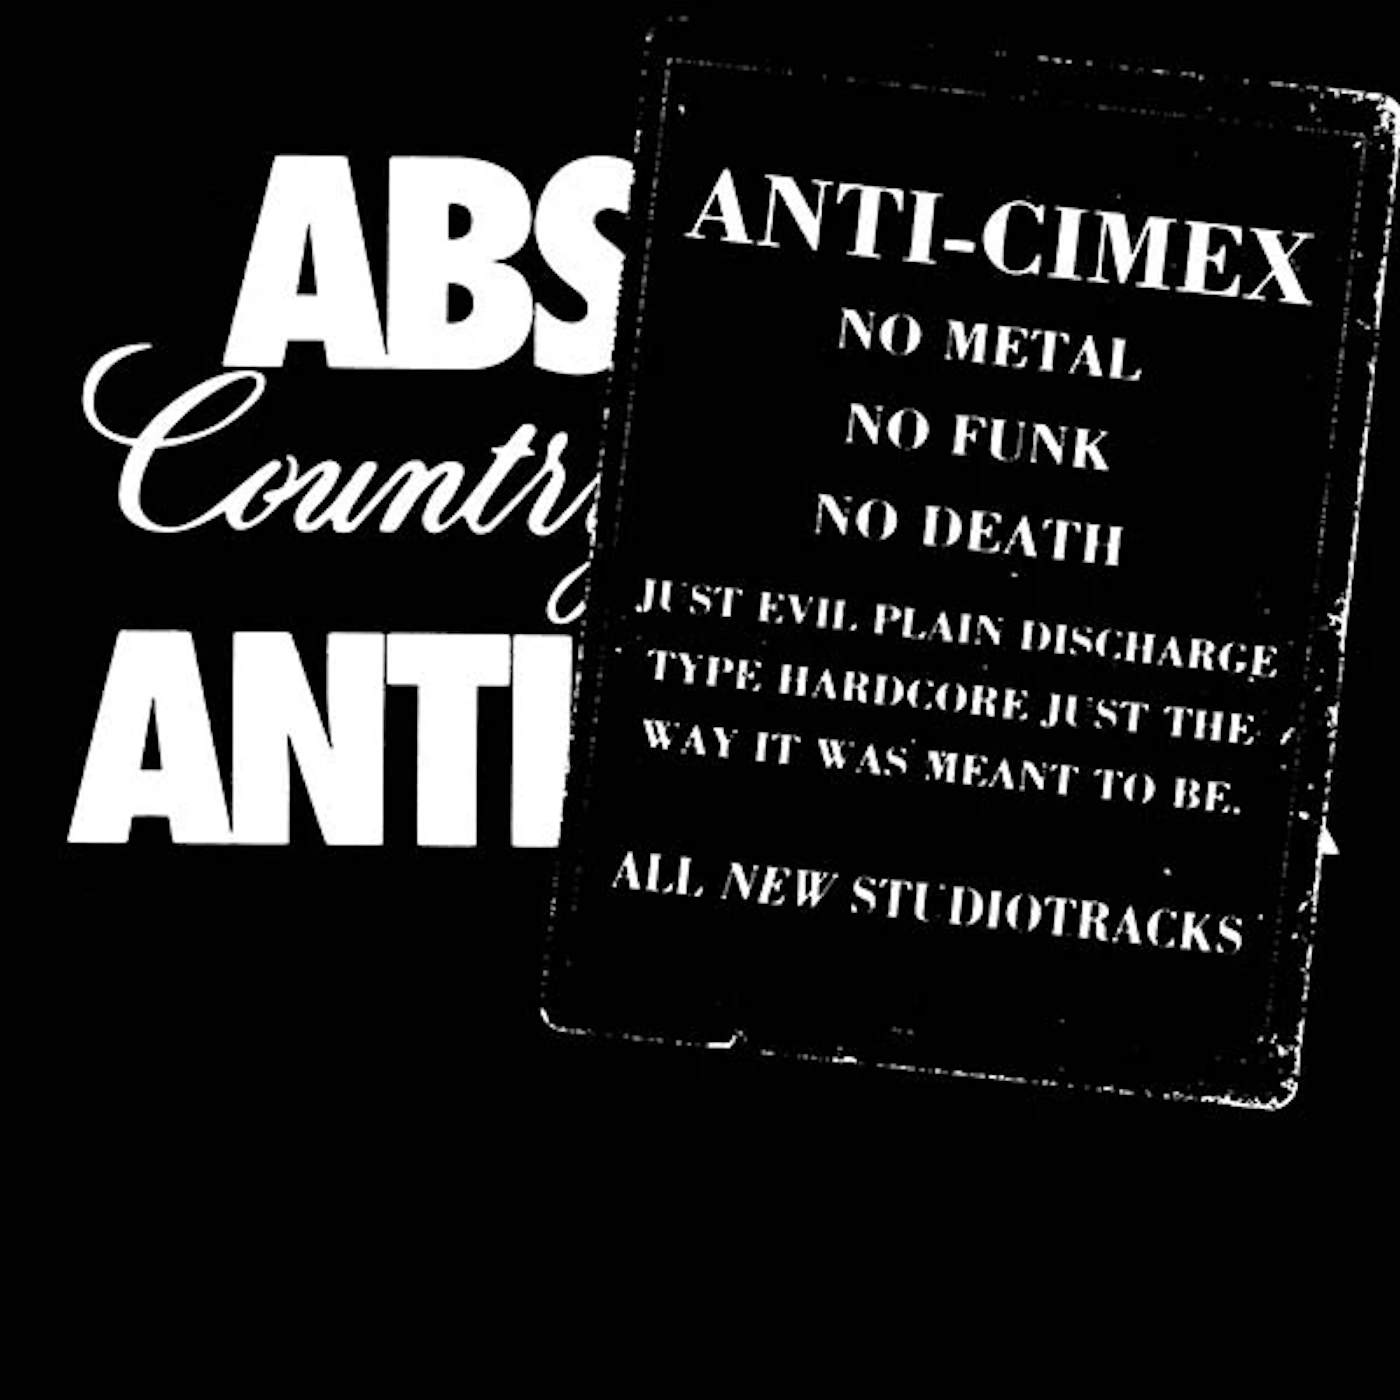 Anti Cimex Absolut country of sweden Vinyl Record